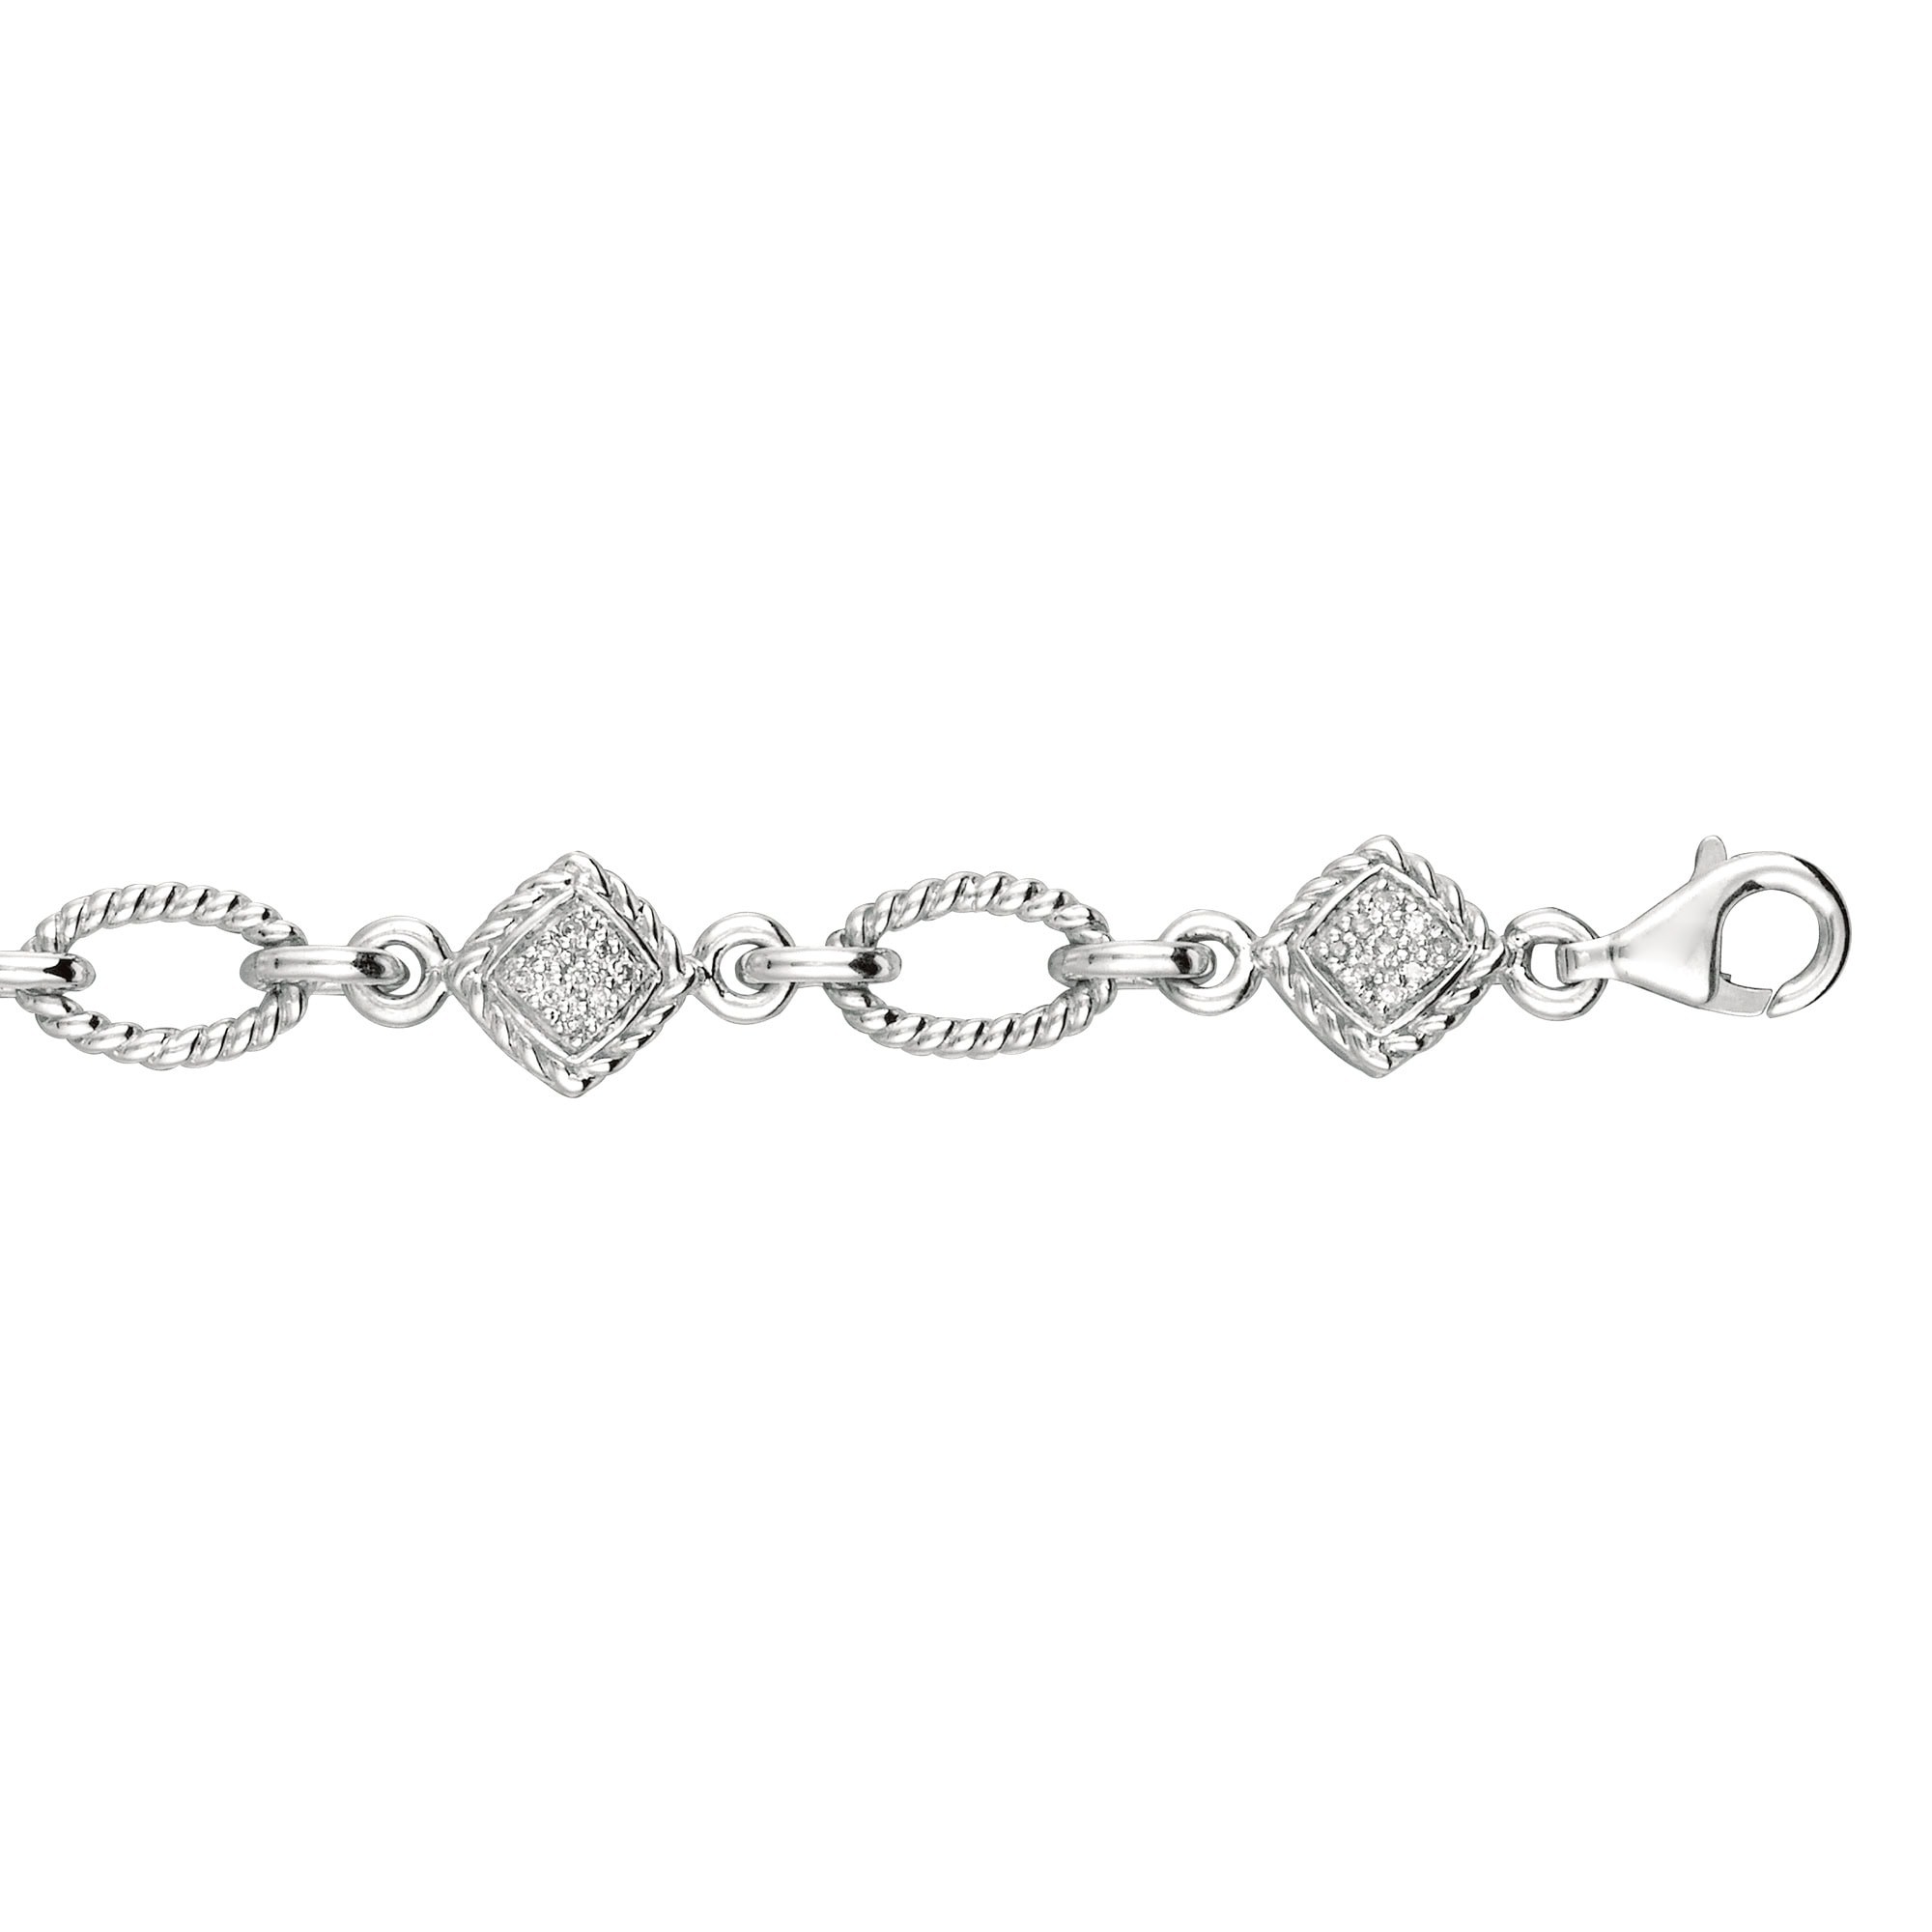 Silver Open Oval Rope .25ct Diamond Accent Link Bracelet